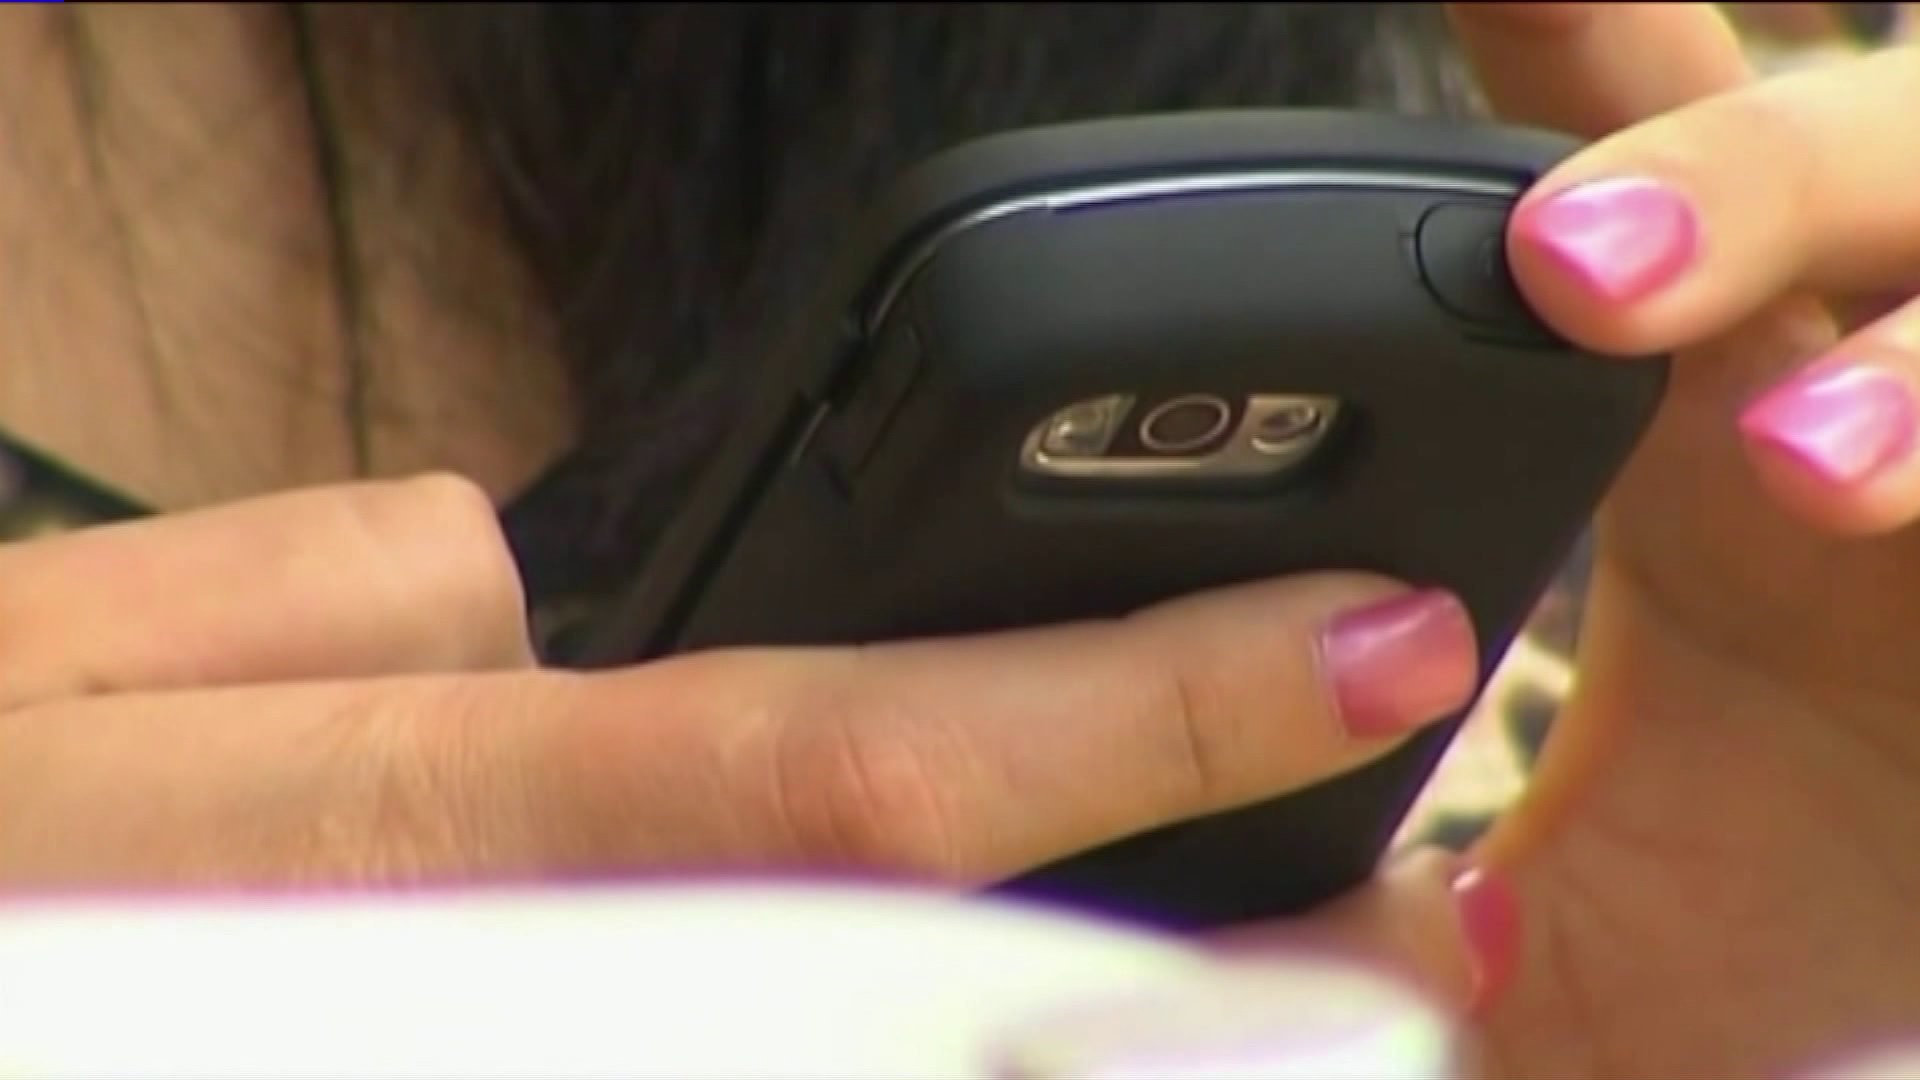 CT lawmakers aim to regulate cellphone tracking devices